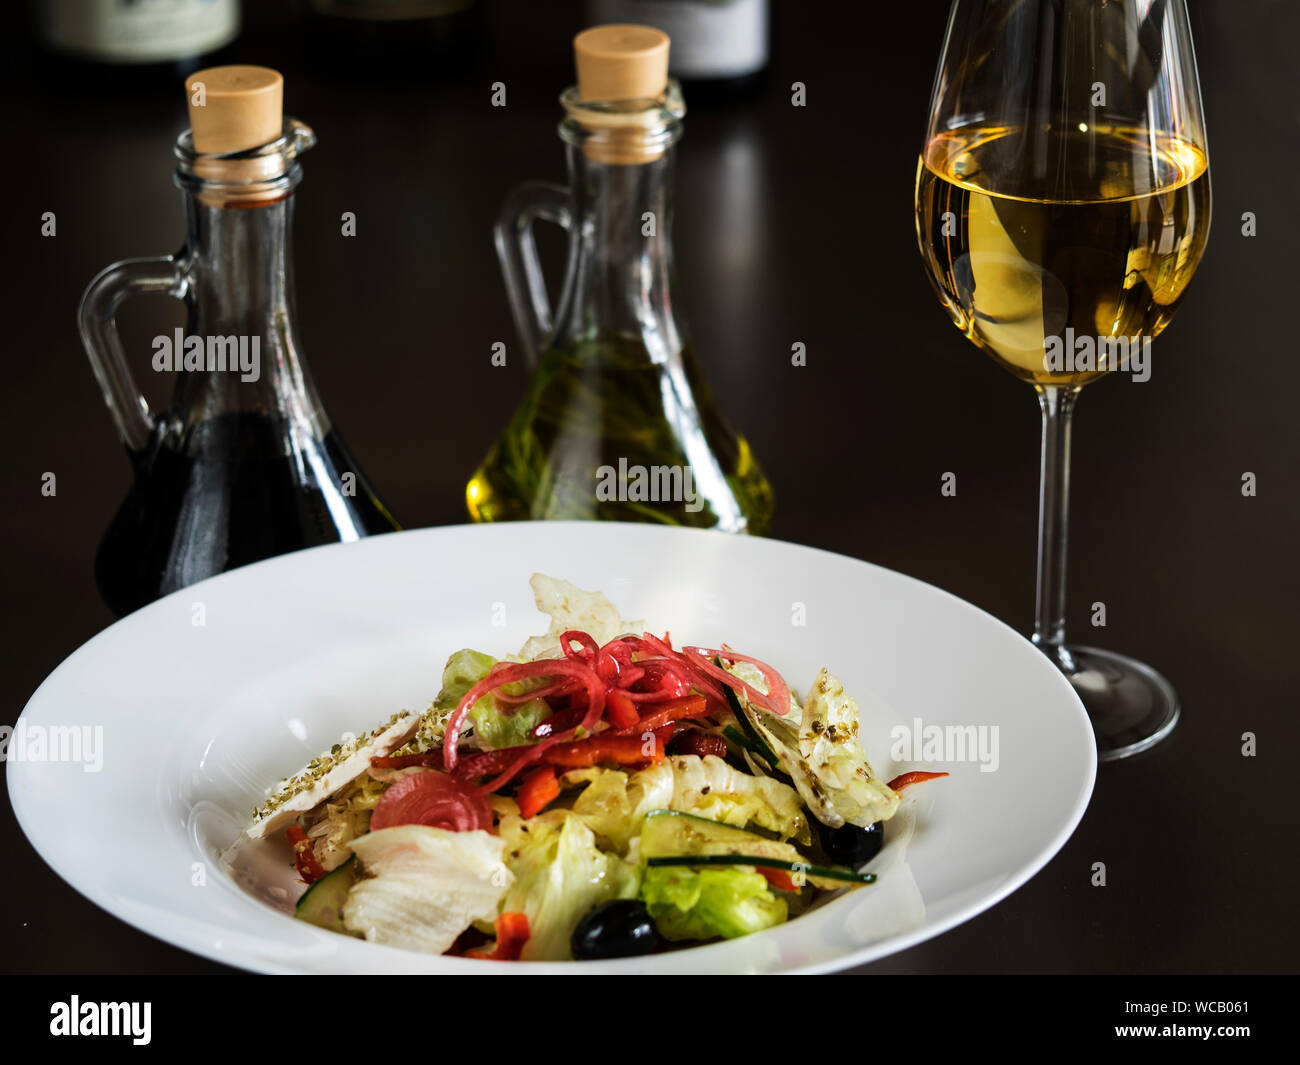 Close-up Of Greek Salad On Table Stock Photo